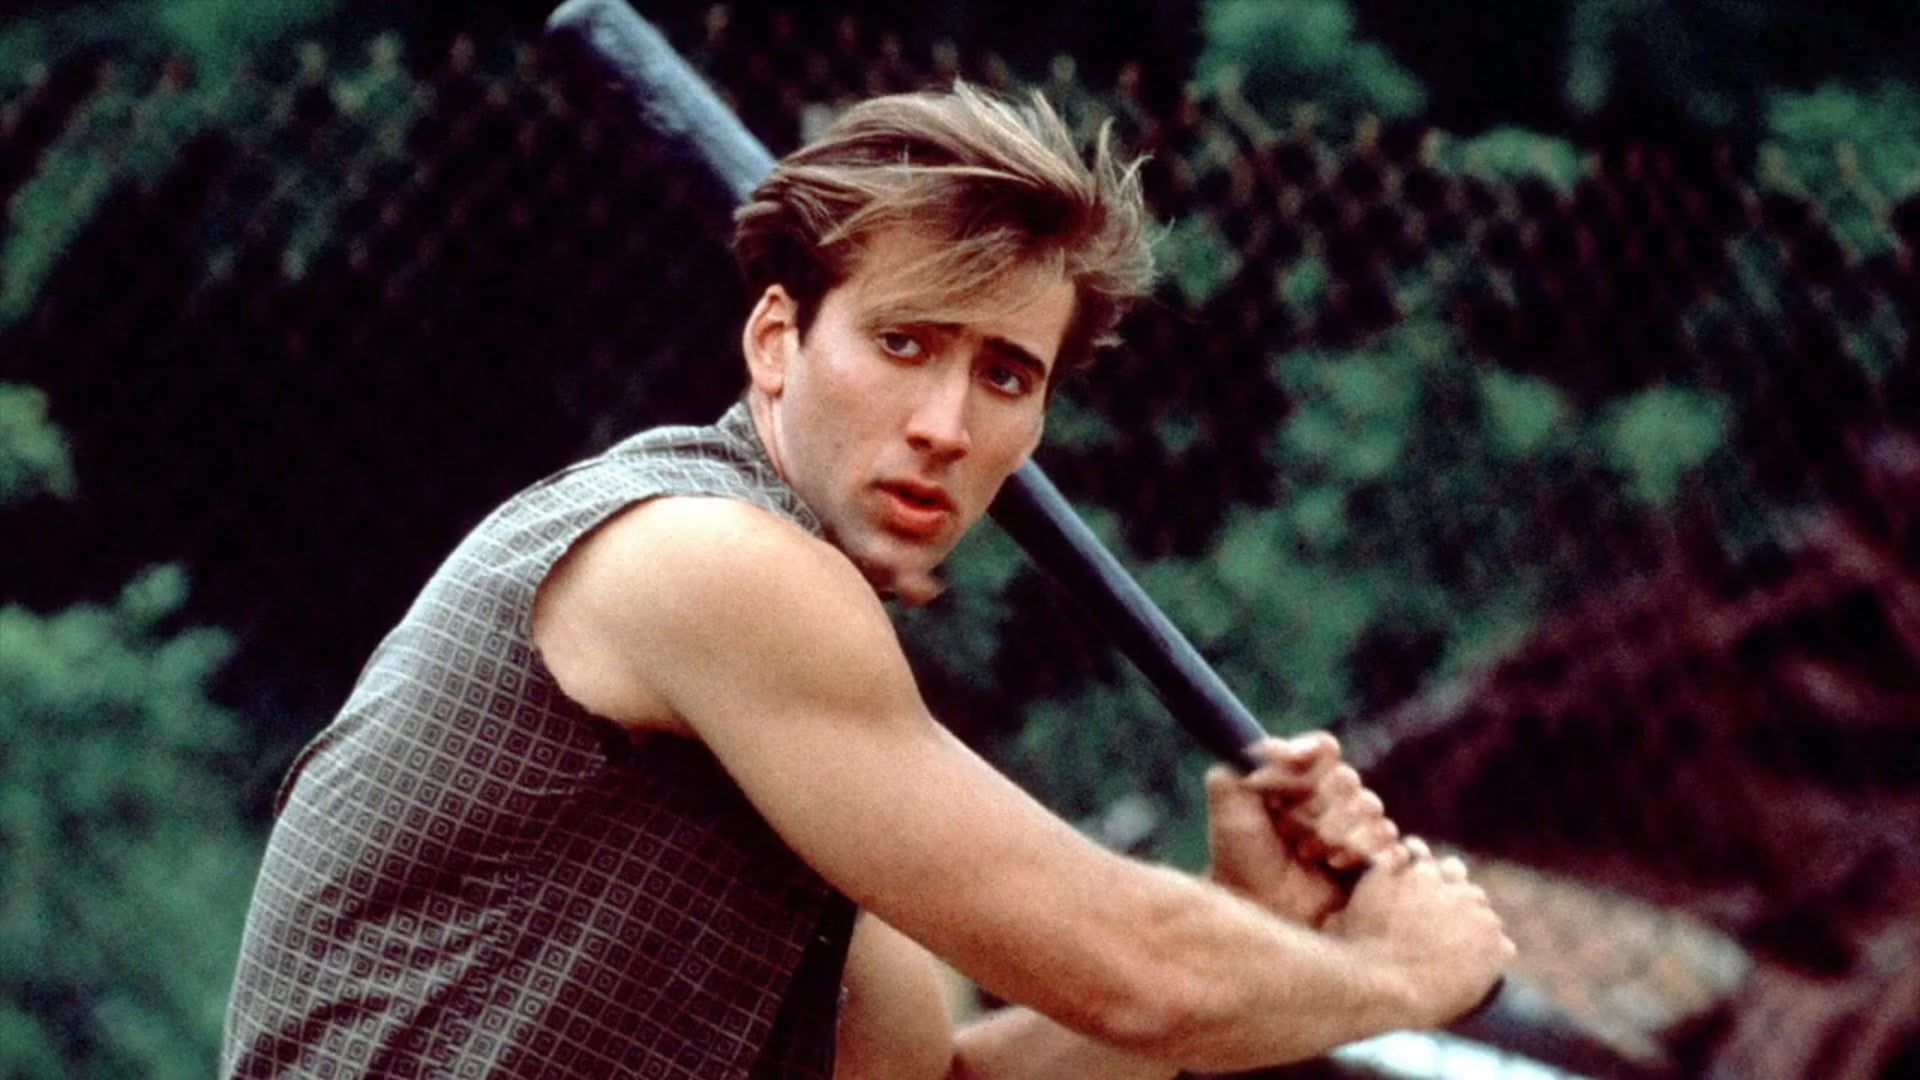 Nicolas Cage at a young age: This is how the actor used to look